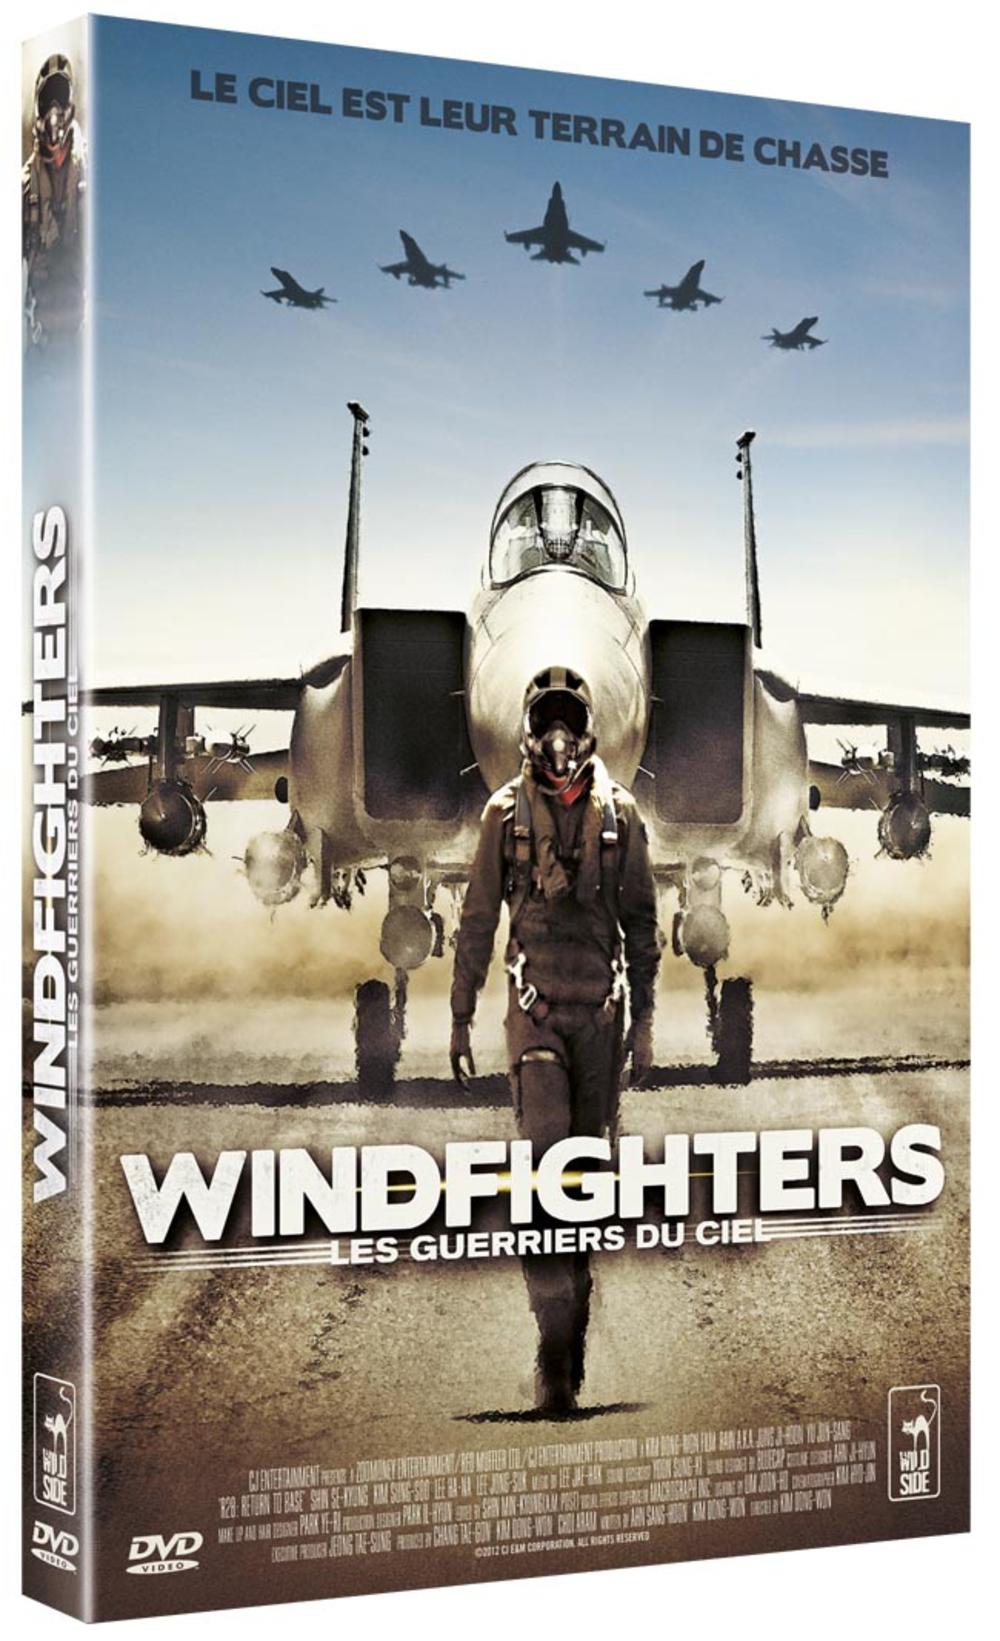 WINDFIGHTERS